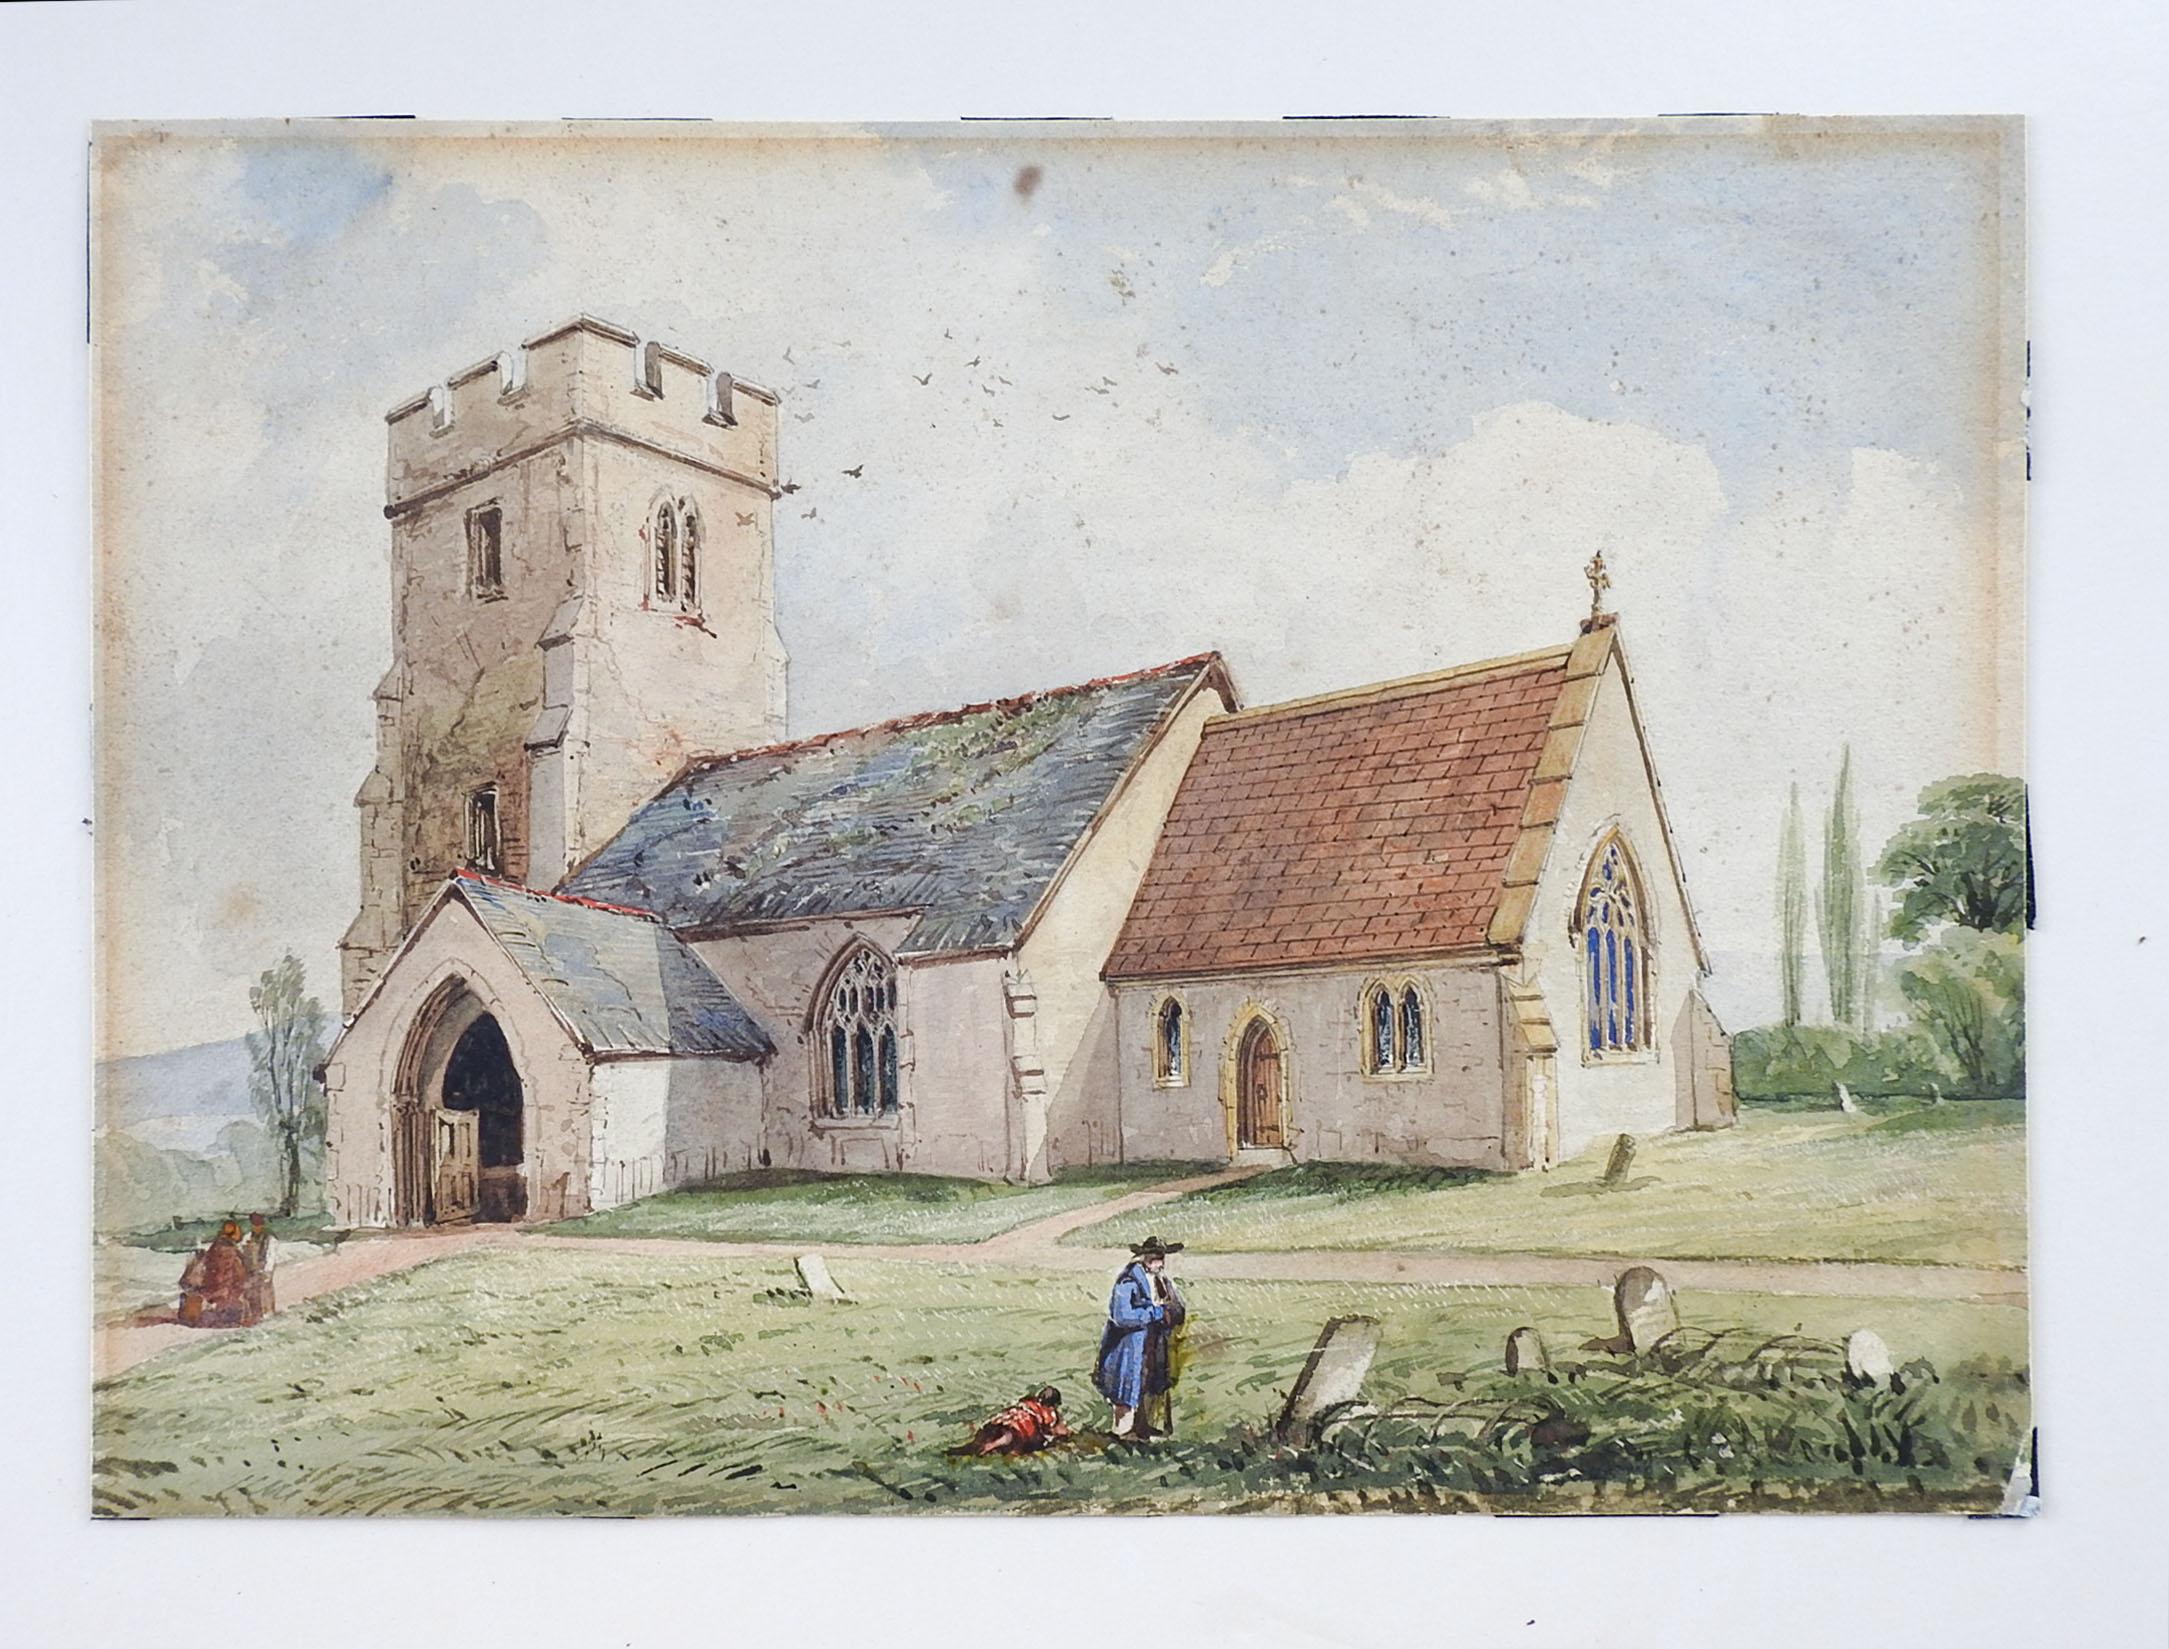 Circa mid 19th Century watercolor on paper. Clatworthy Church of St Mary Magdalene, Somerset England. Shows graveyard with iron mortsafe cages over graves. Unsigned. Unframed, age toning with some foxing, repair lower right corner, tape remains on